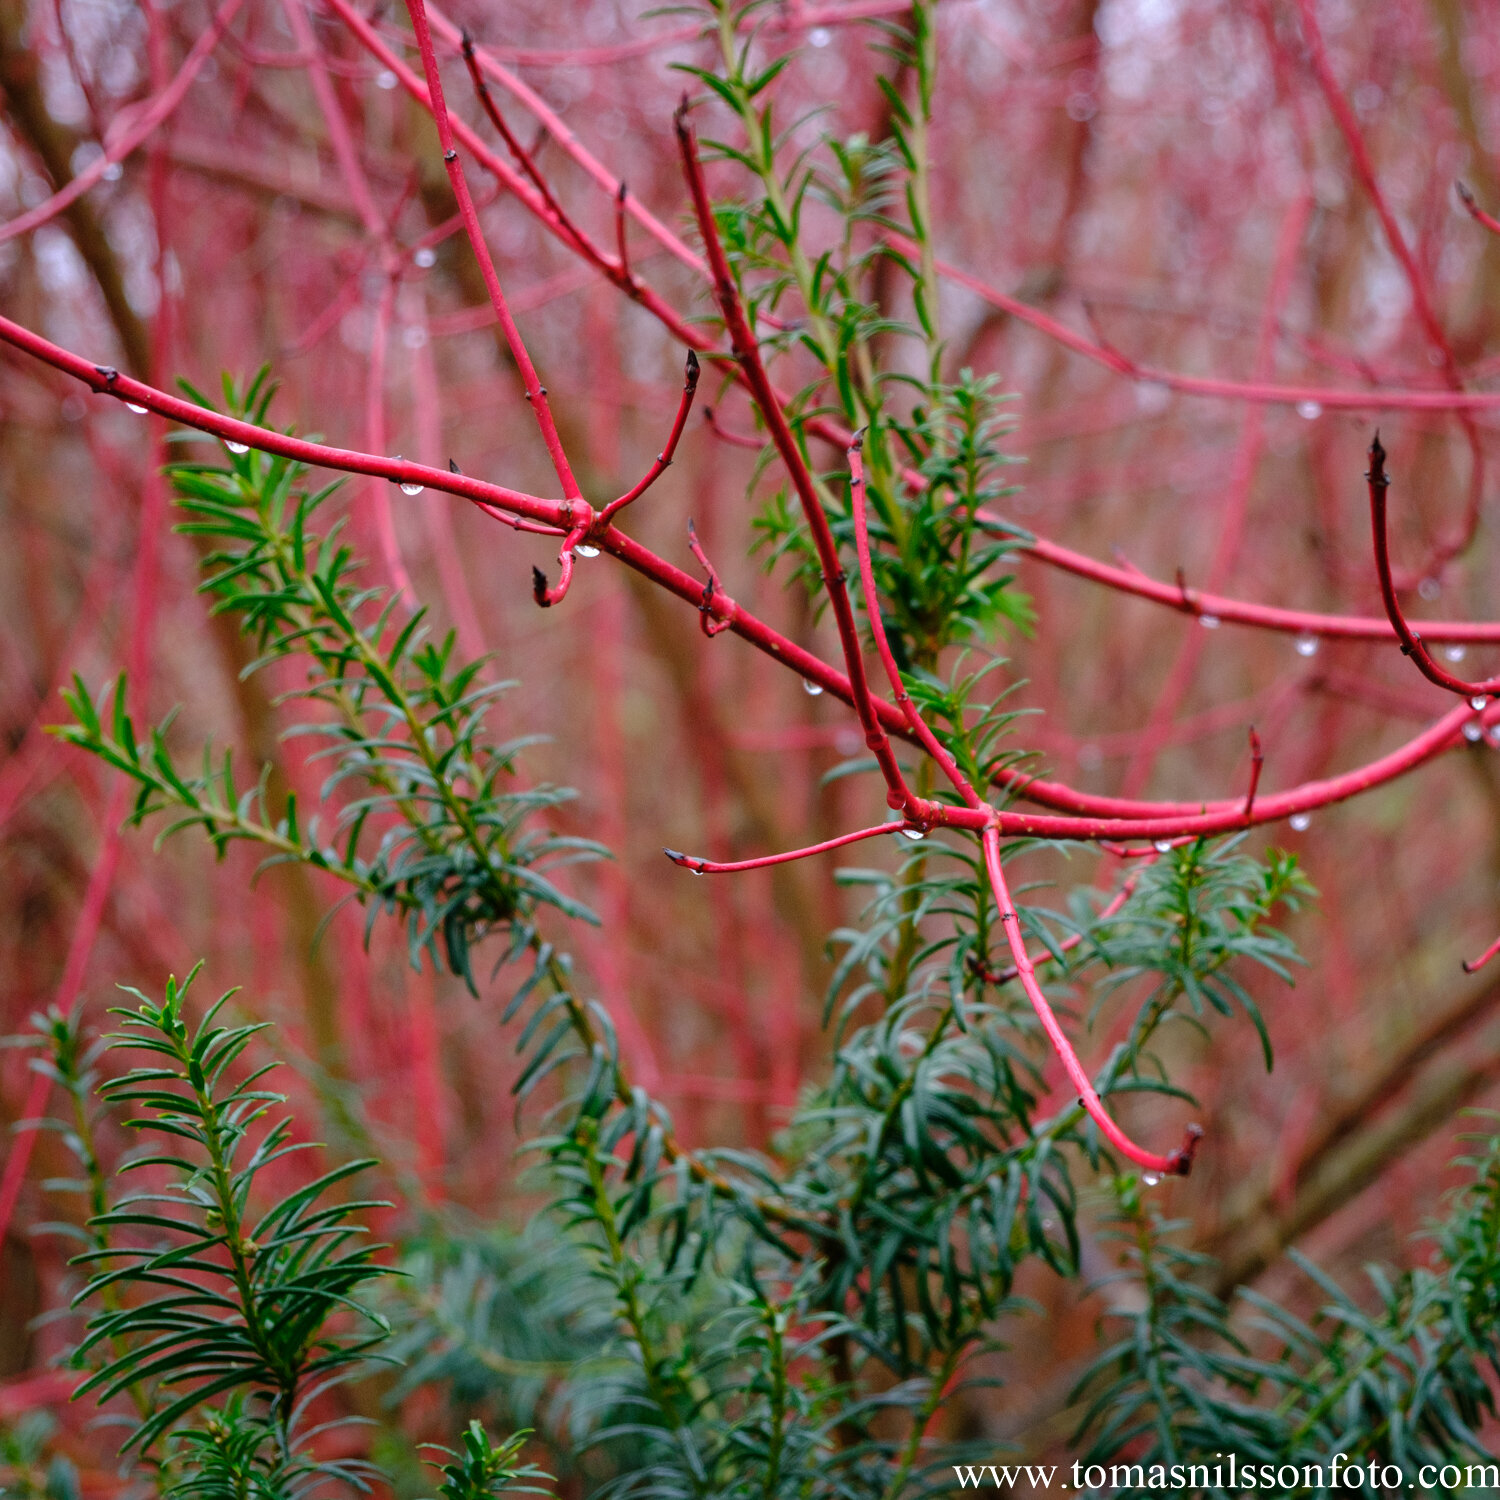 Day 15 - January 15: Red & Green